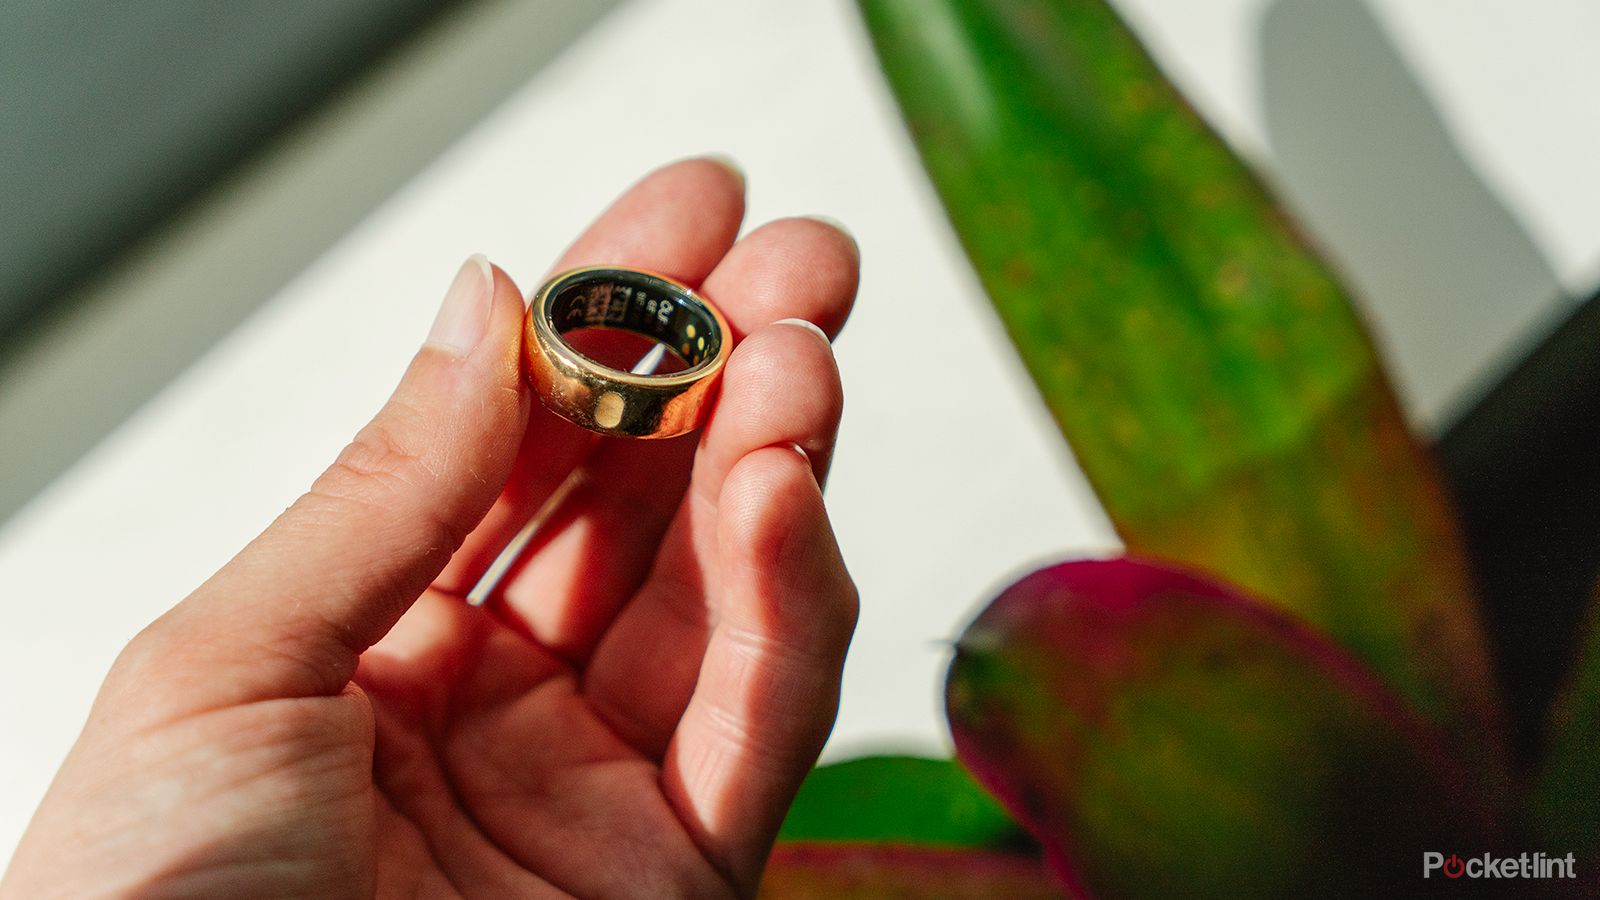 How to Find a Missing Oura Ring